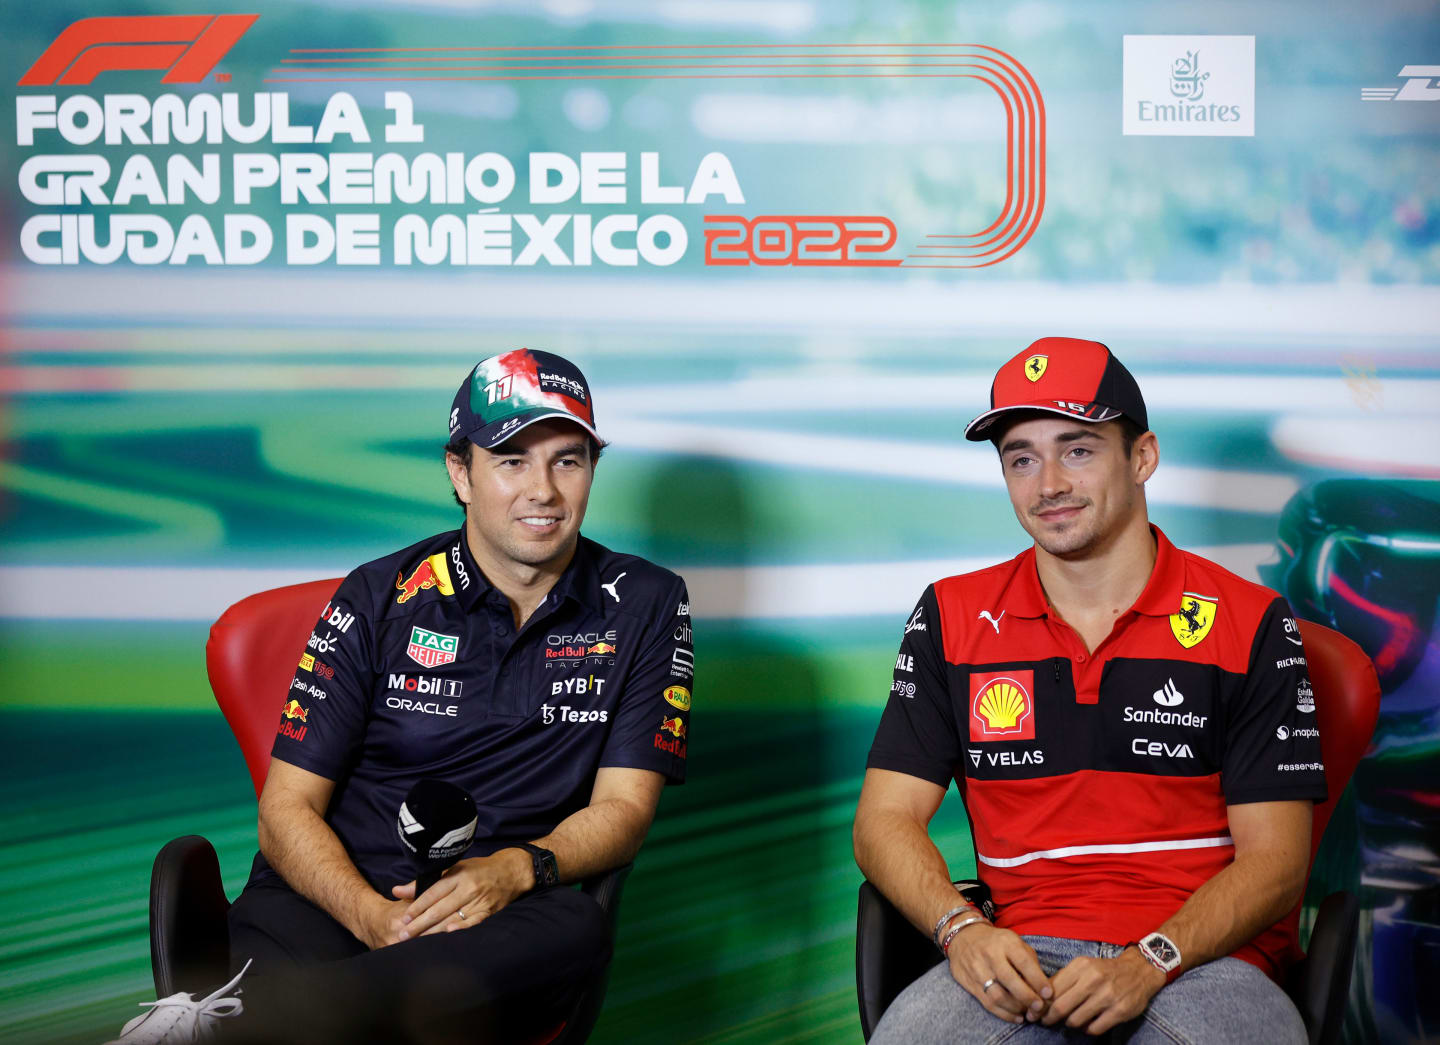 MEXICO CITY, MEXICO - OCTOBER 27: Sergio Perez of Mexico and Oracle Red Bull Racing and Charles Leclerc of Monaco and Ferrari attend the Drivers Press Conference during previews ahead of the F1 Grand Prix of Mexico at Autodromo Hermanos Rodriguez on October 27, 2022 in Mexico City, Mexico. (Photo by Jared C. Tilton/Getty Images)